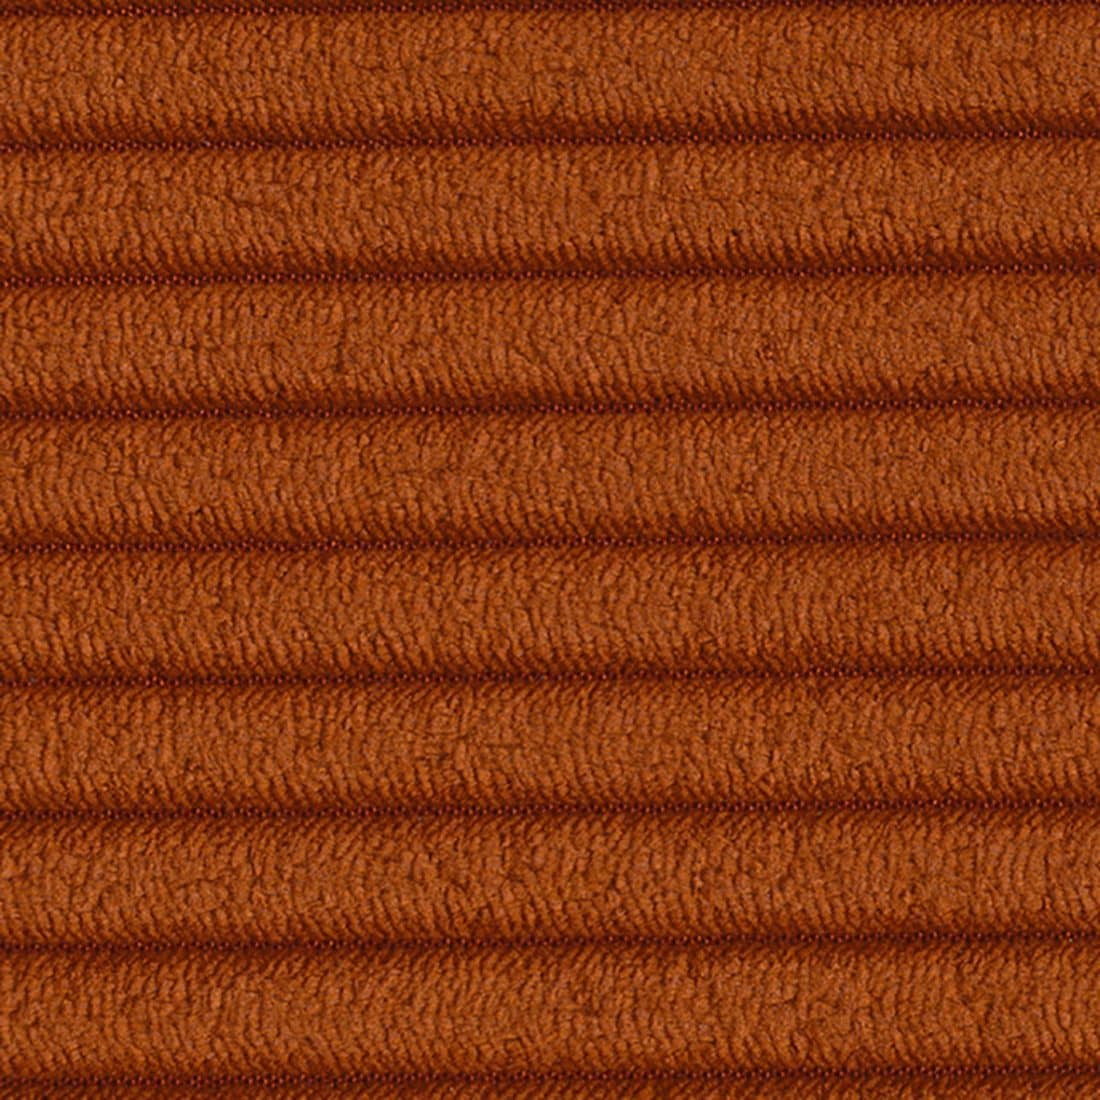 TRP Post Container Data TRP Post ID 30287 Fabric Swatch Dess 595 Corduroy Burnt Orange TRP Post Container